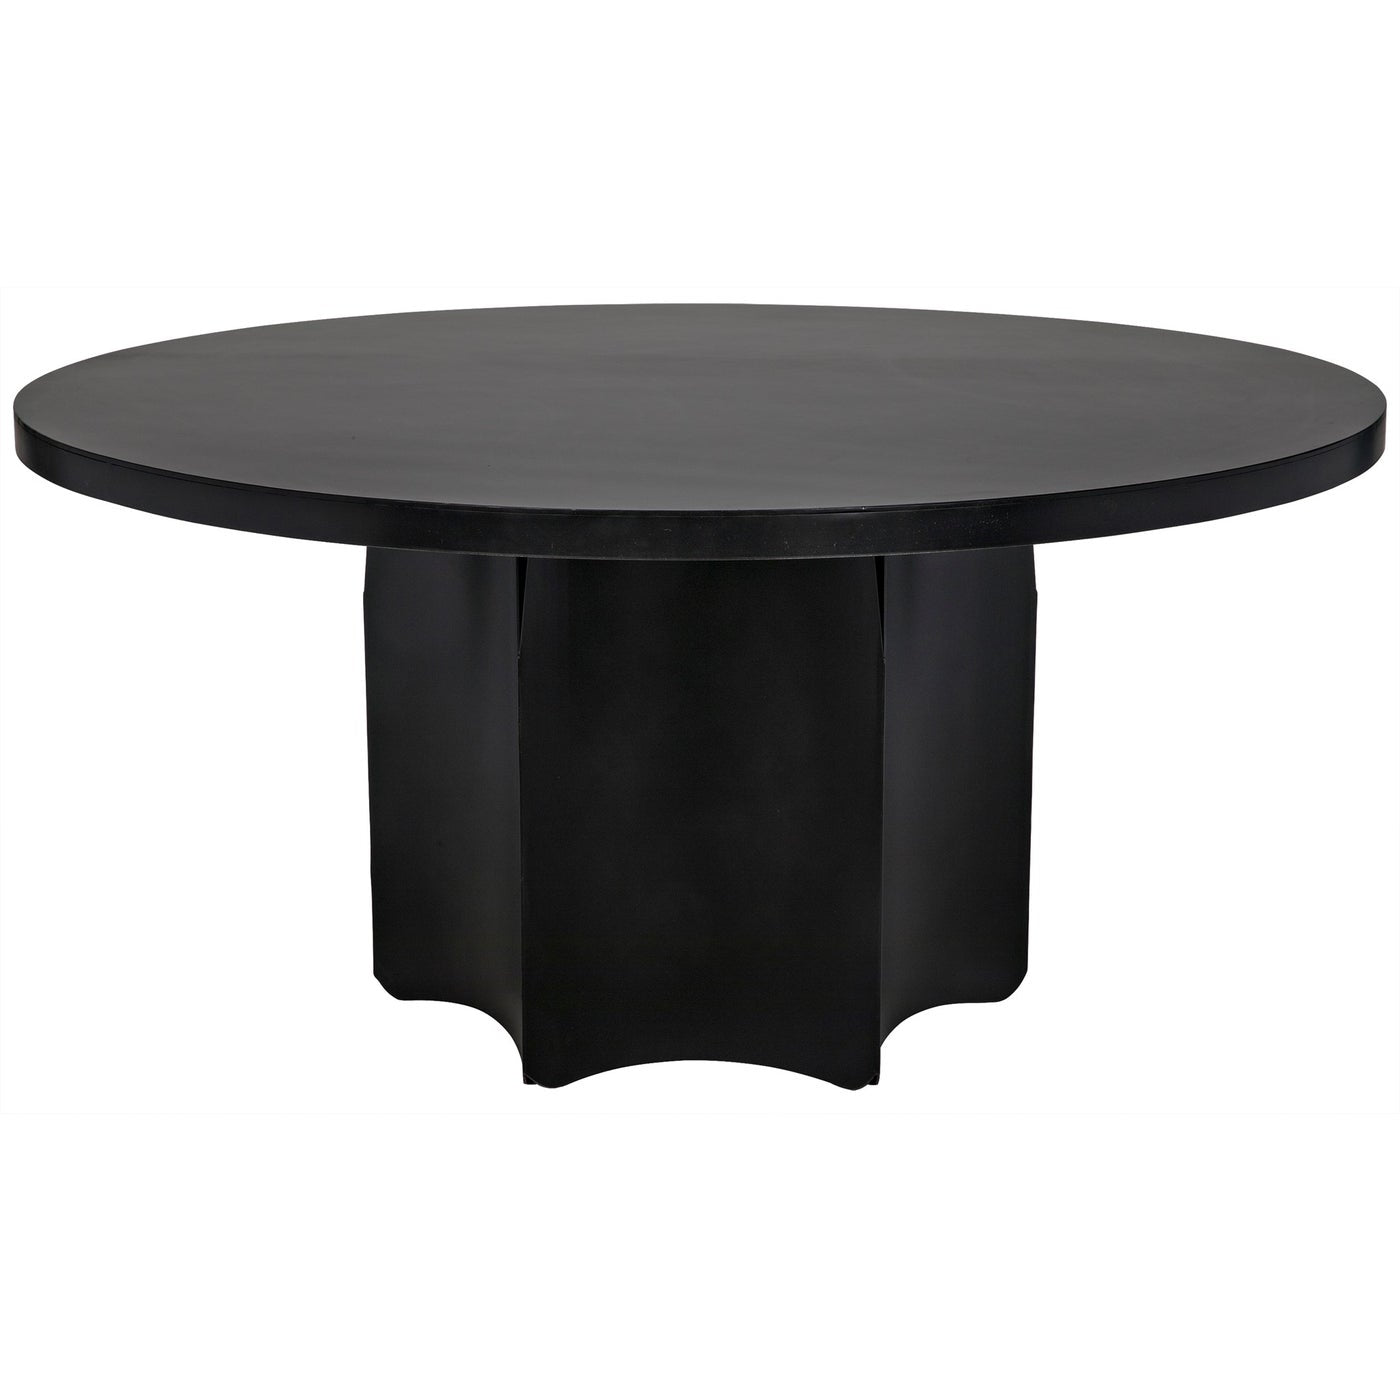 Noir, Theoden Dining Table